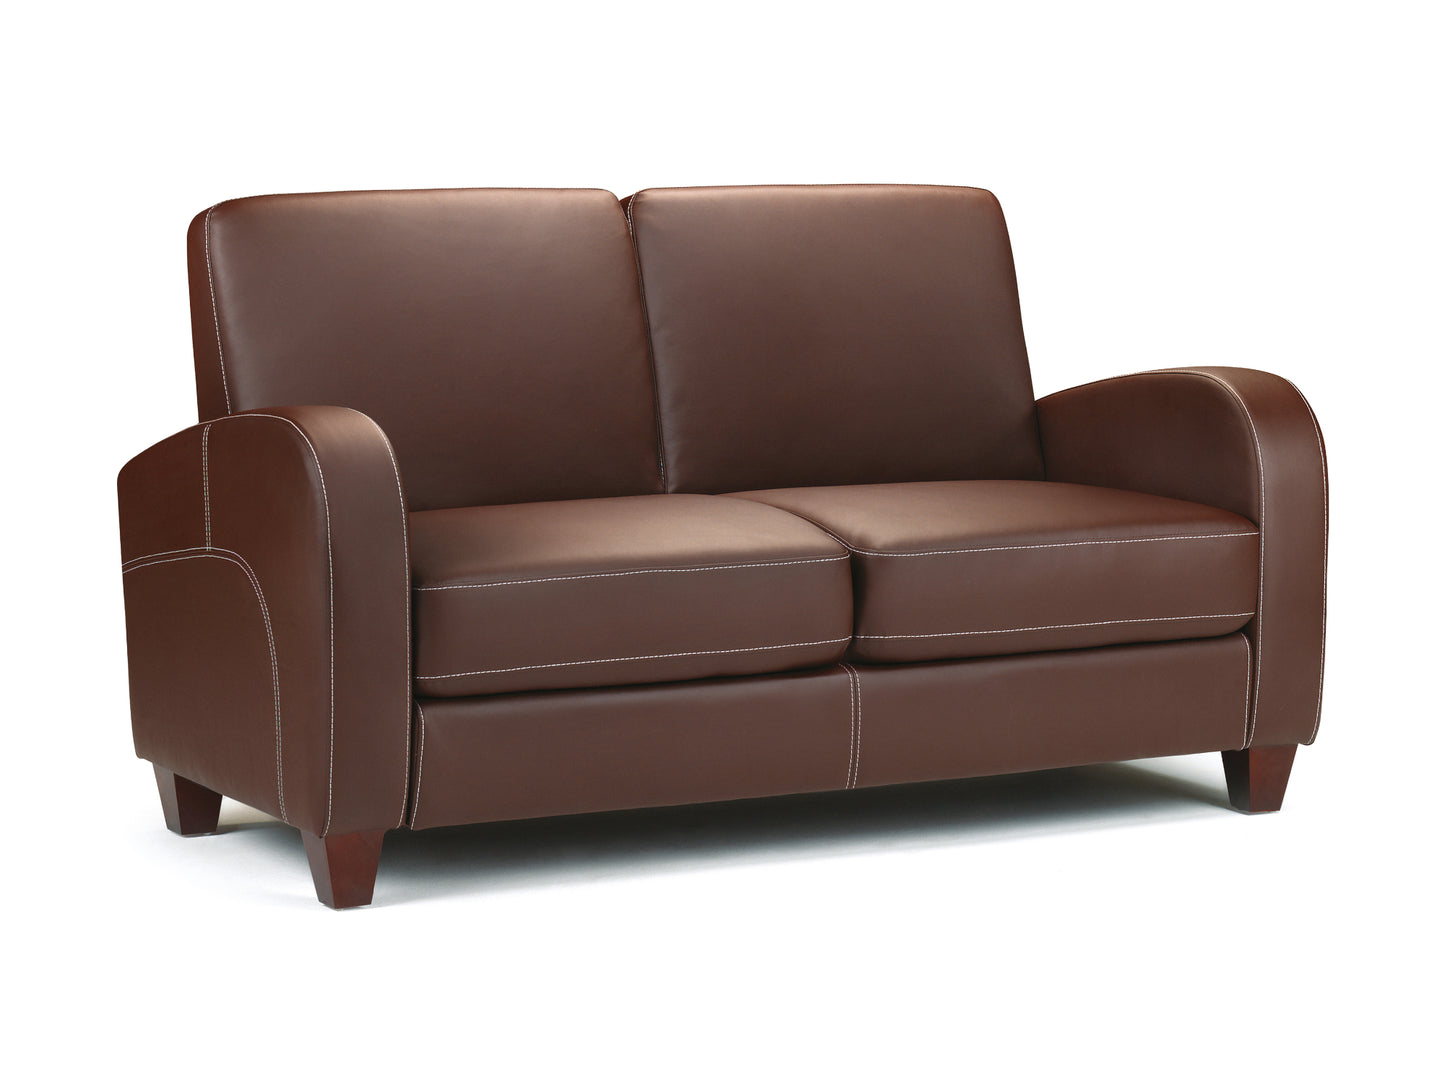 Vivo Sofa and Sofa Bed in Chestnut Faux Leather